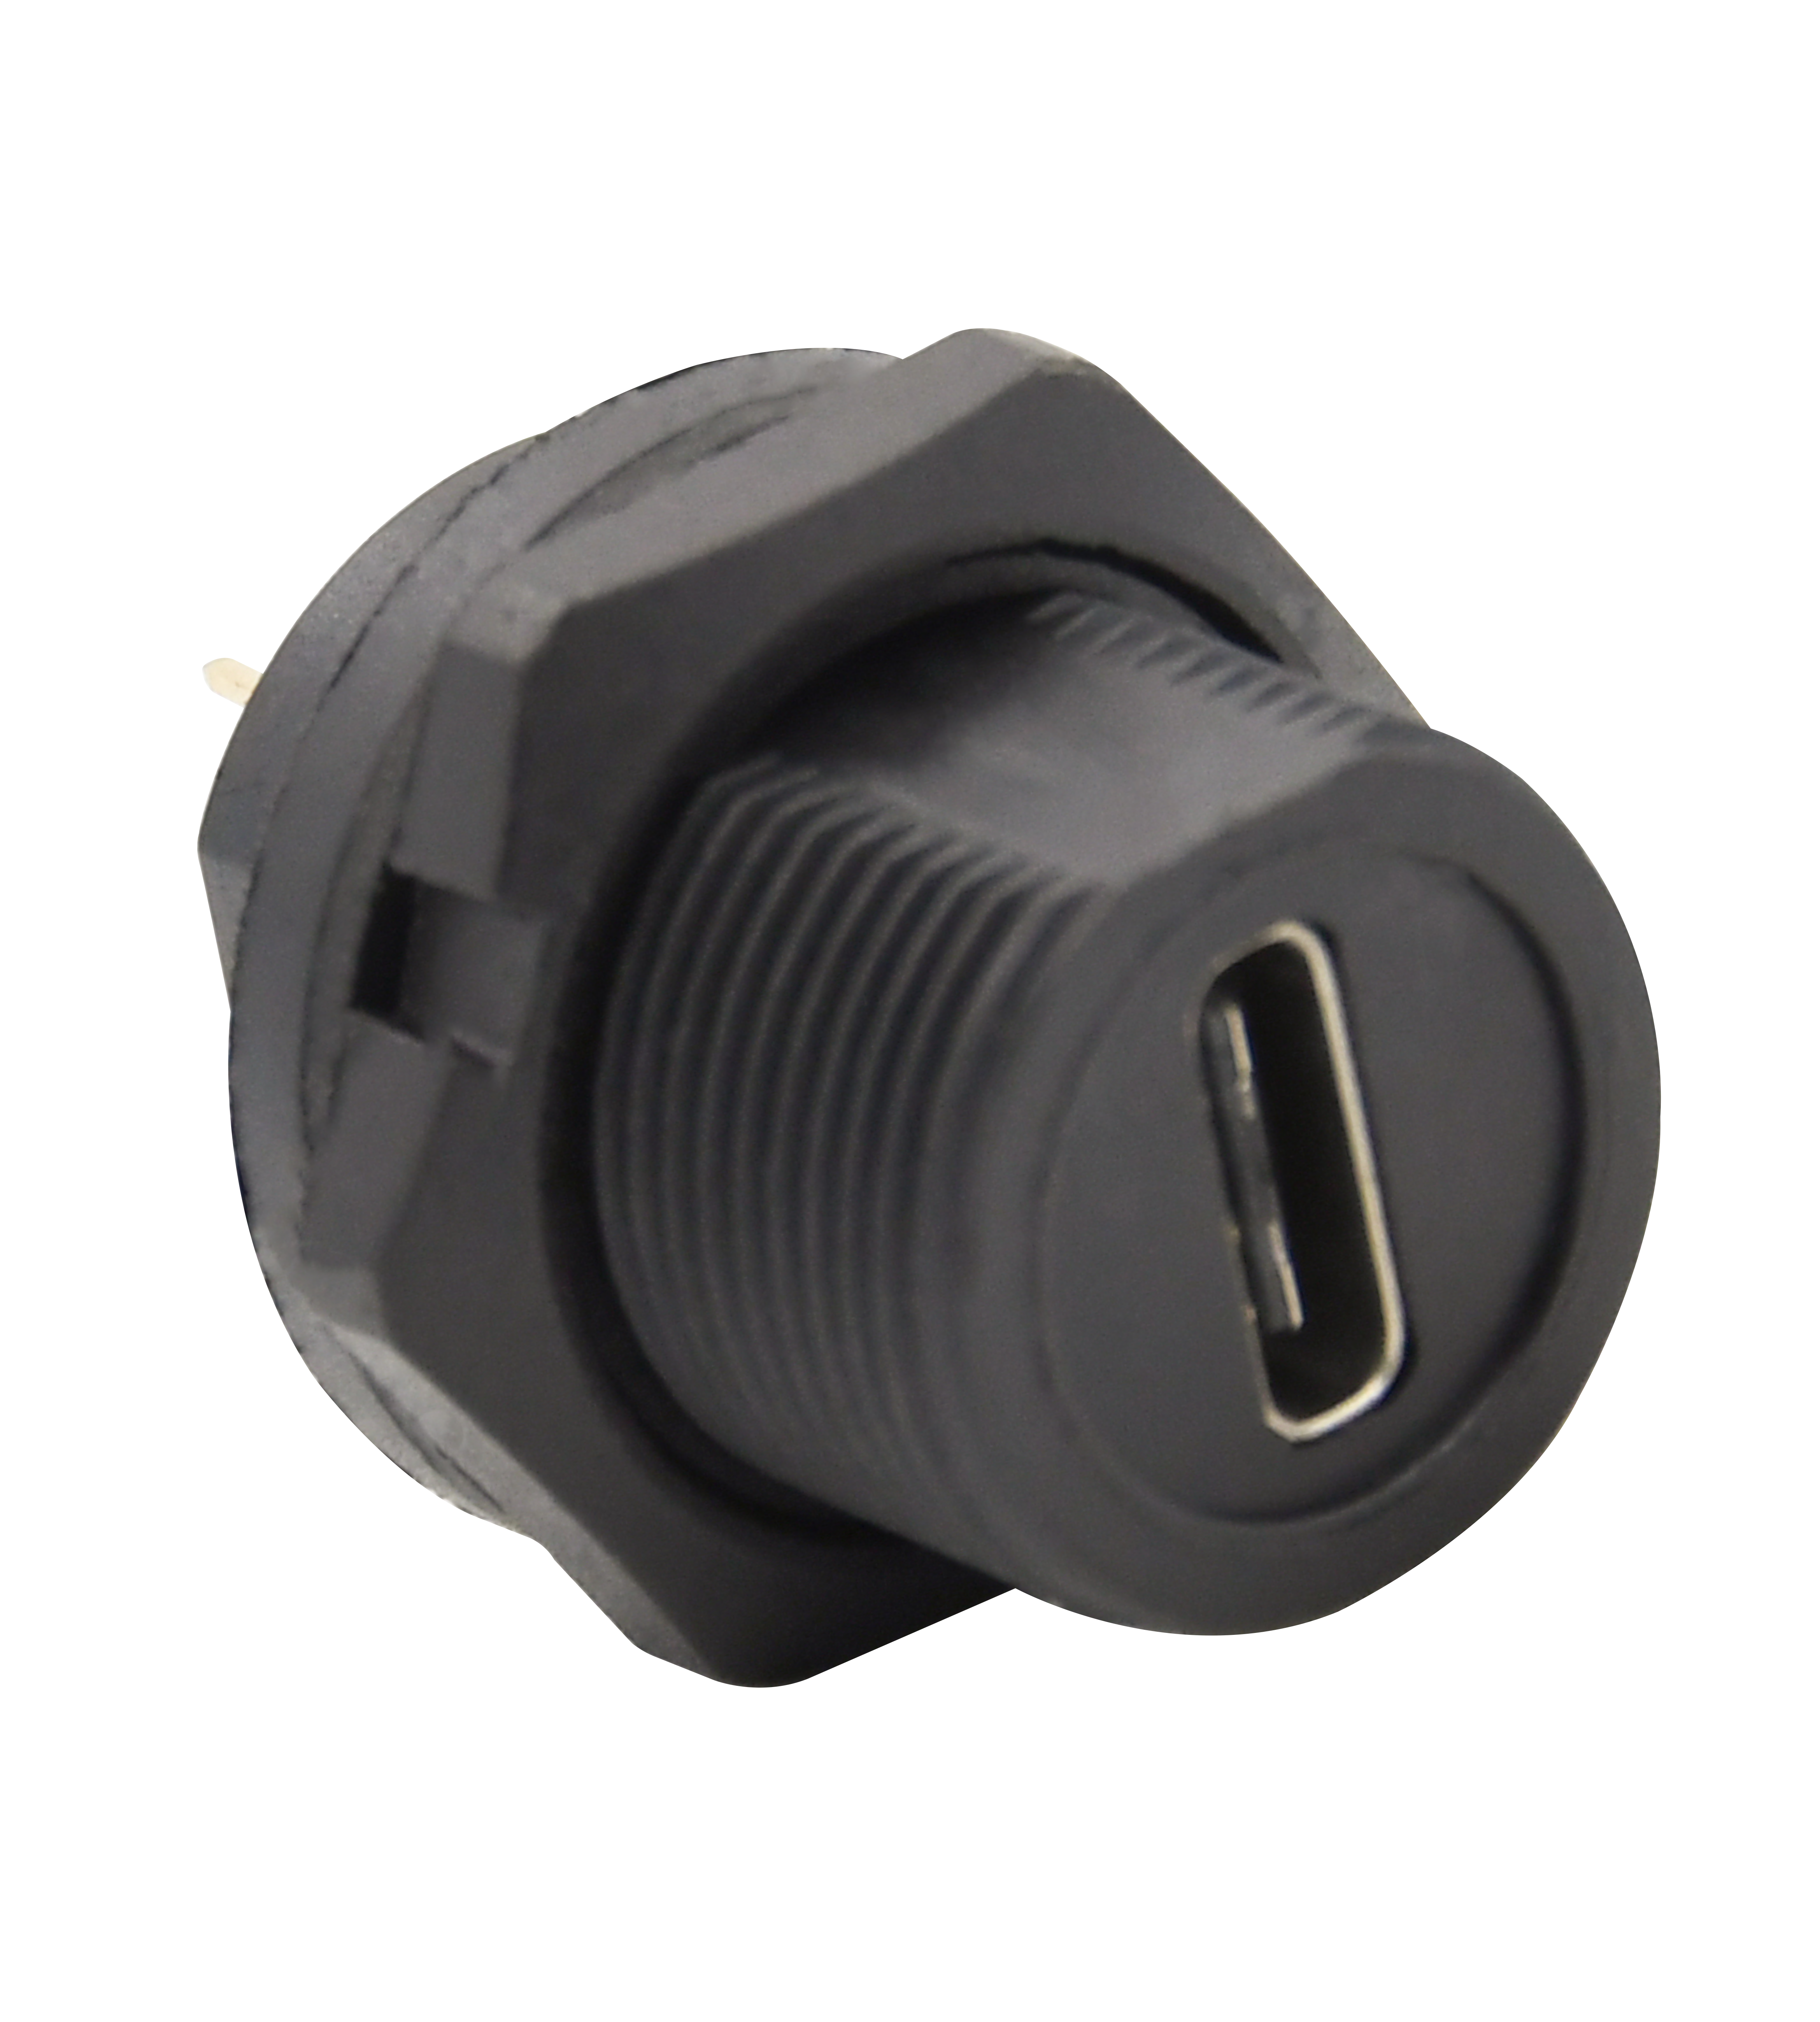 Innovative Rigoal USB Connectors - The Future of Industrial Connectivity